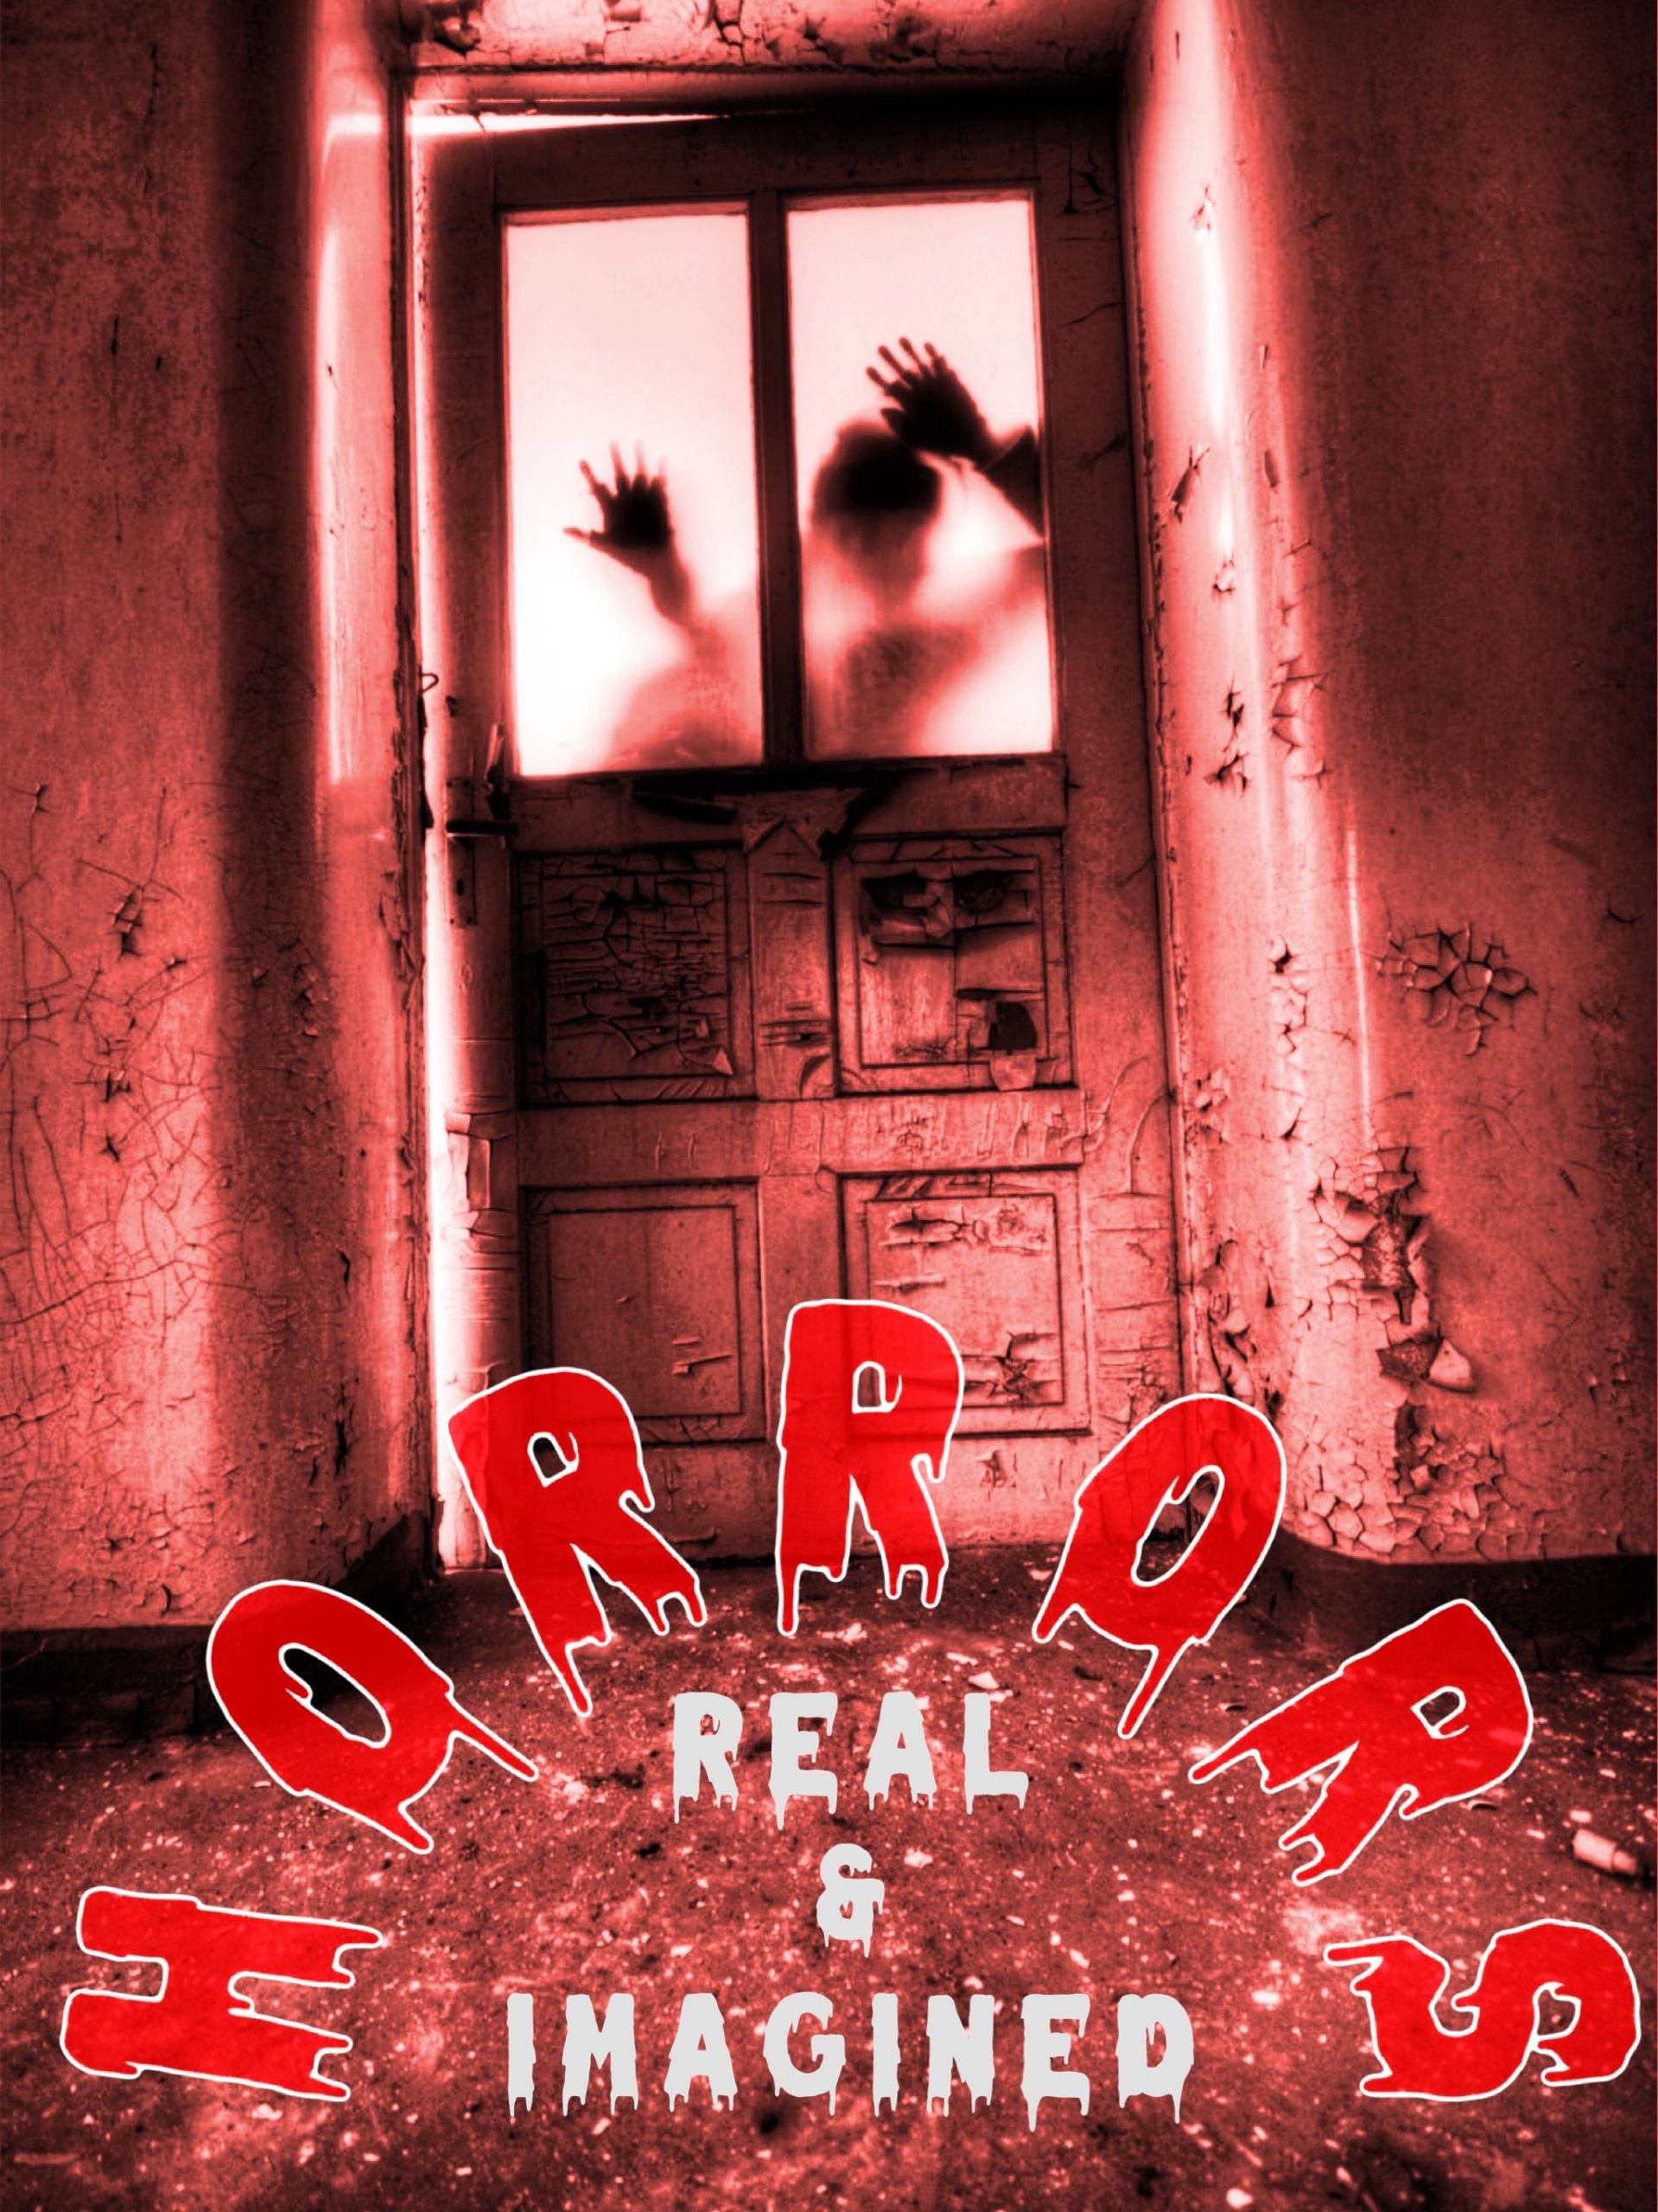 A silhouette of an figure presses its hands against a door. The image is red and black and white and reads "Horrors, Real & Imagined"